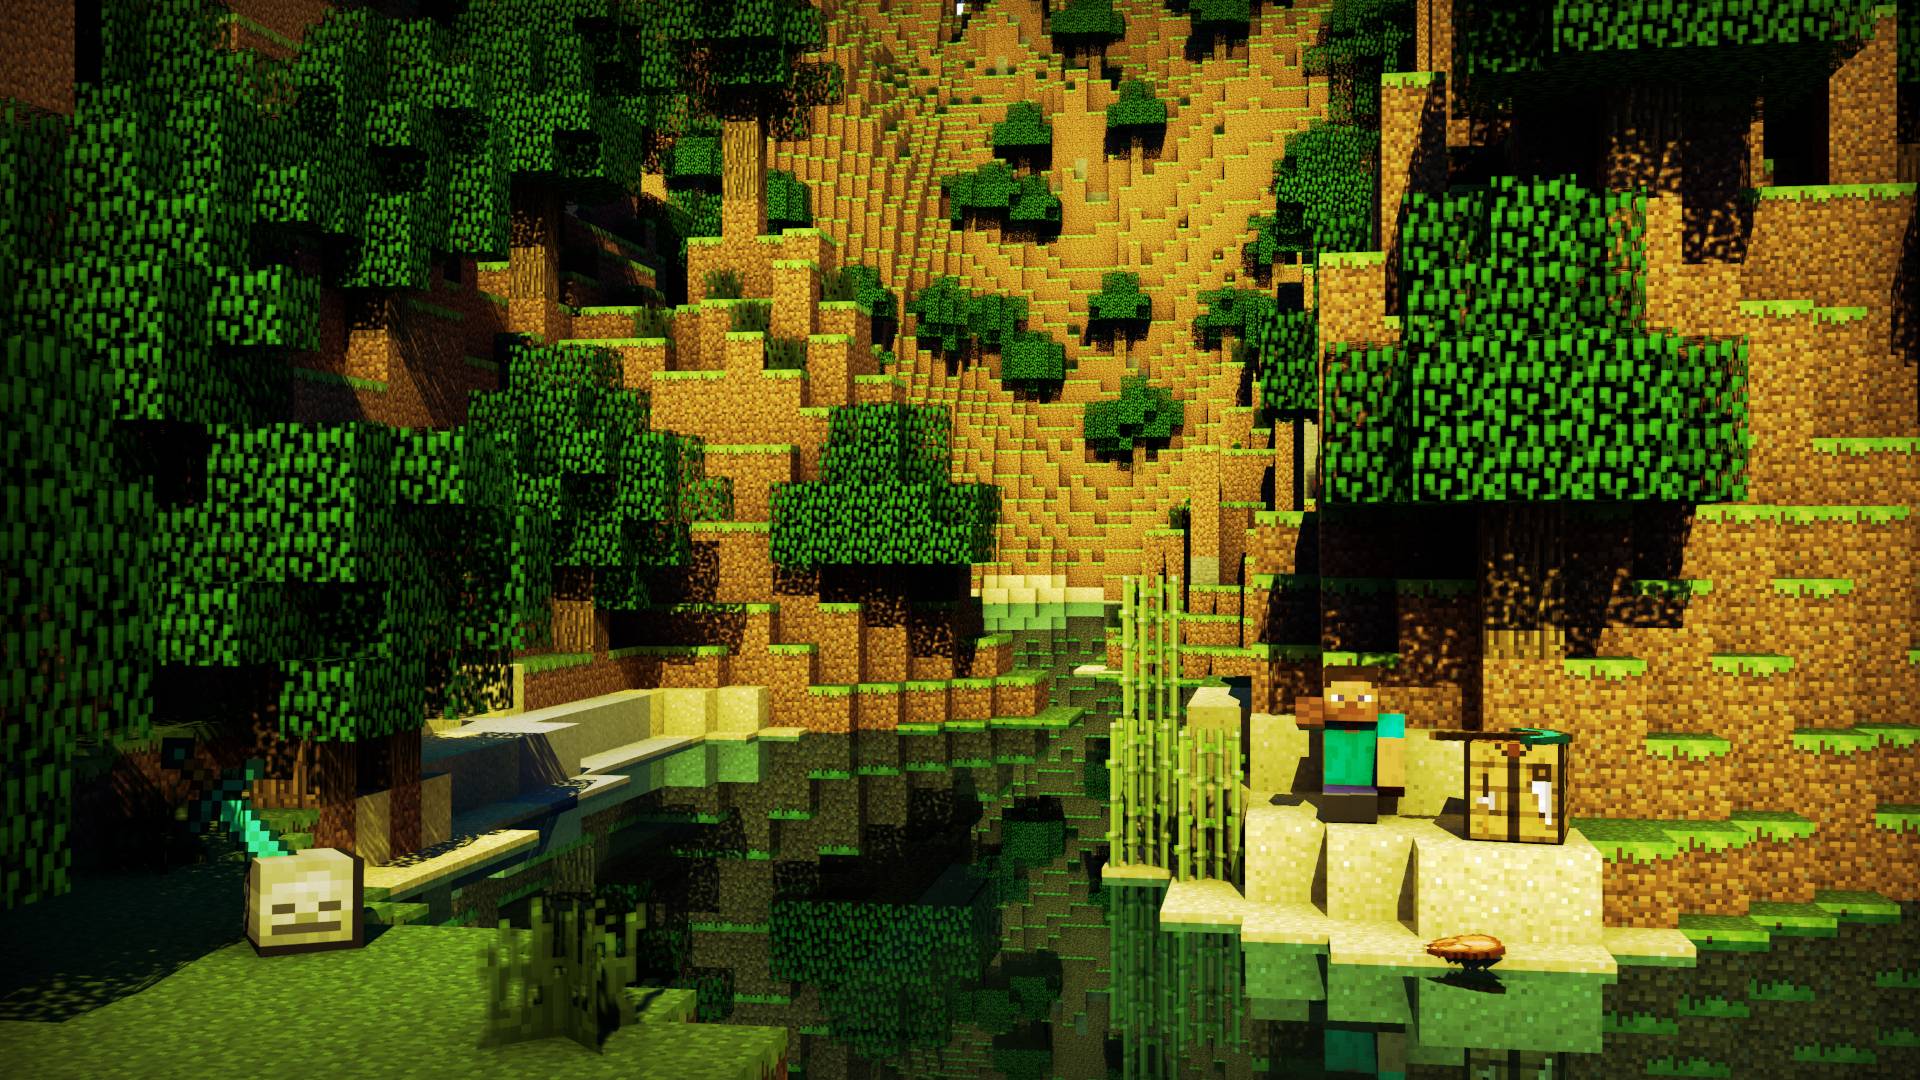 Cool Minecraft Backgrounds - Wallpaper Cave